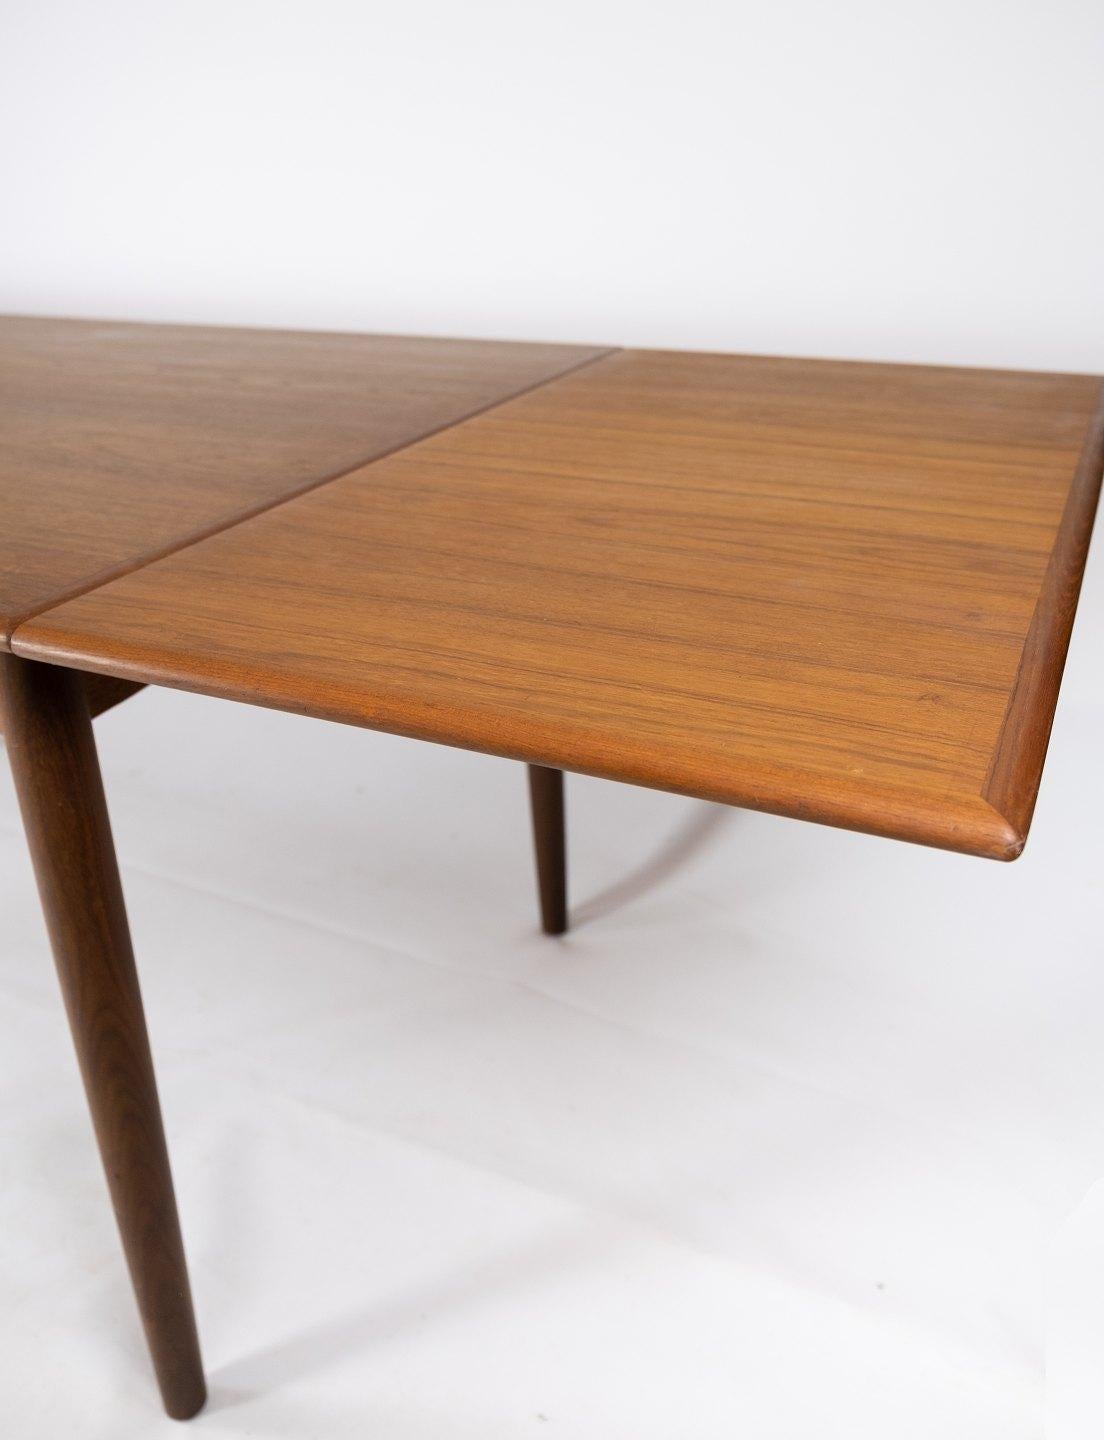 Mid-20th Century Dining Table in Teak with Extensions of Danish Design from the 1960s